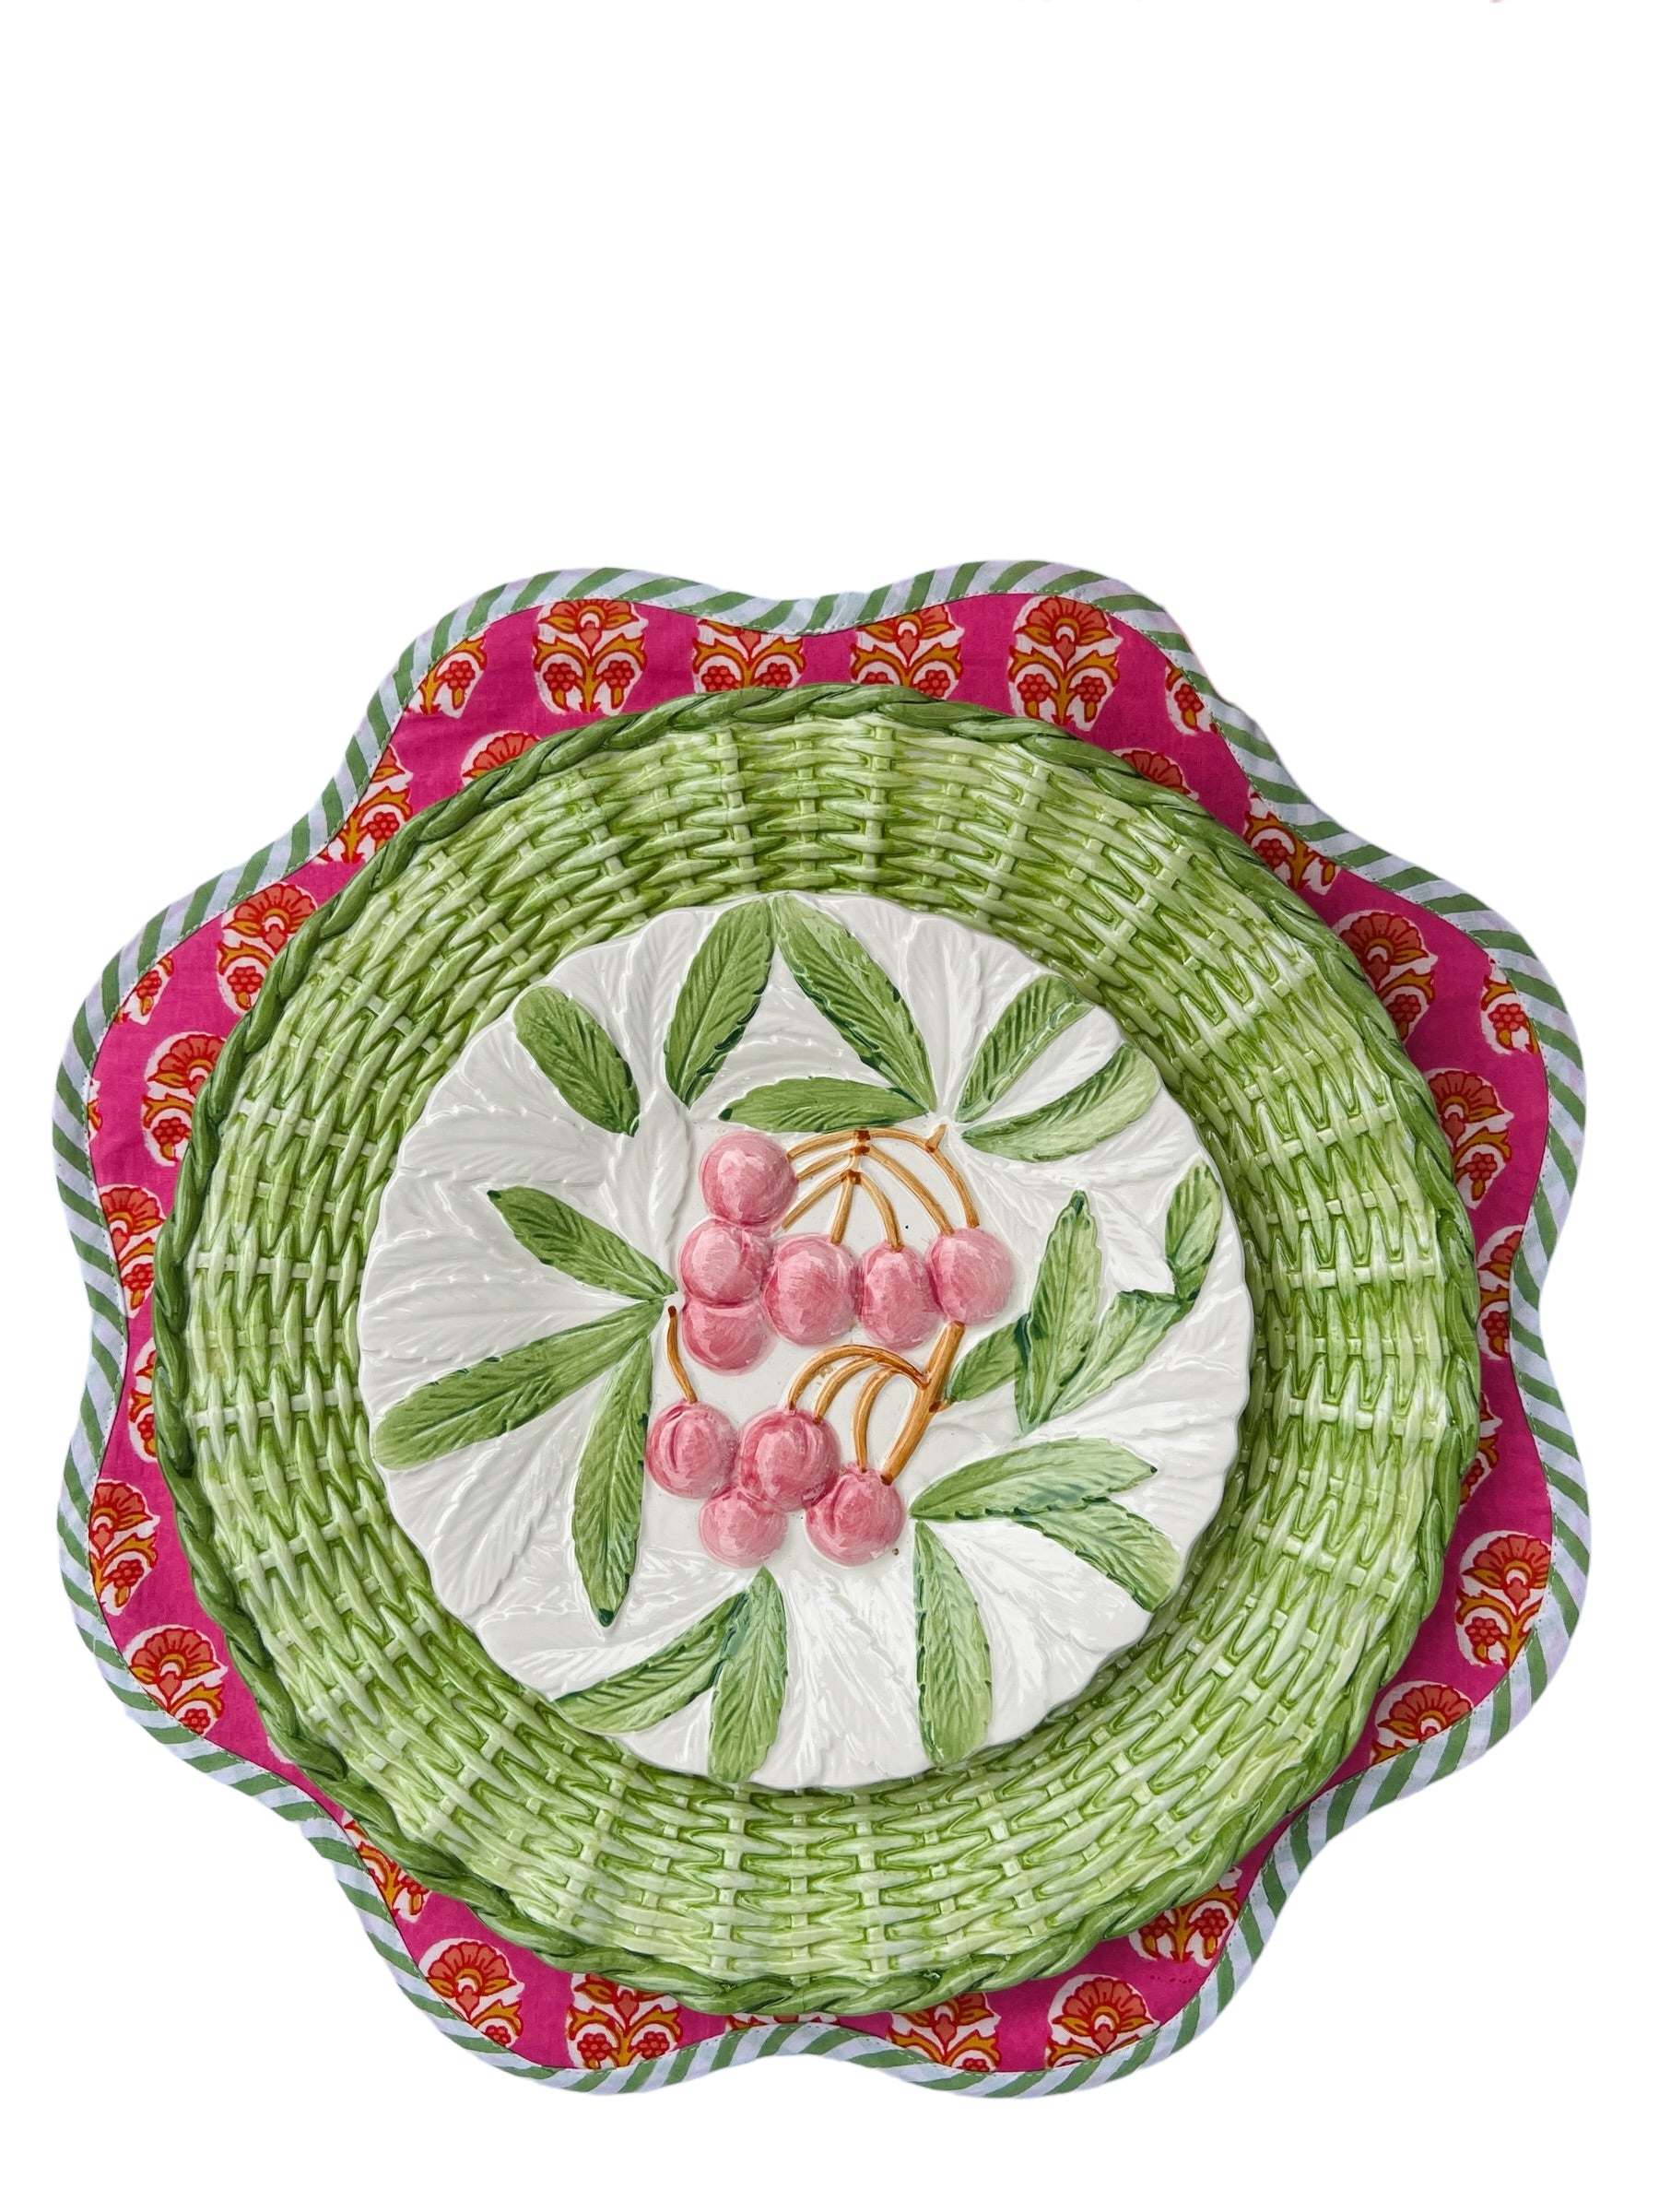 Scalloped bright pink block print placemat set with green and white piping